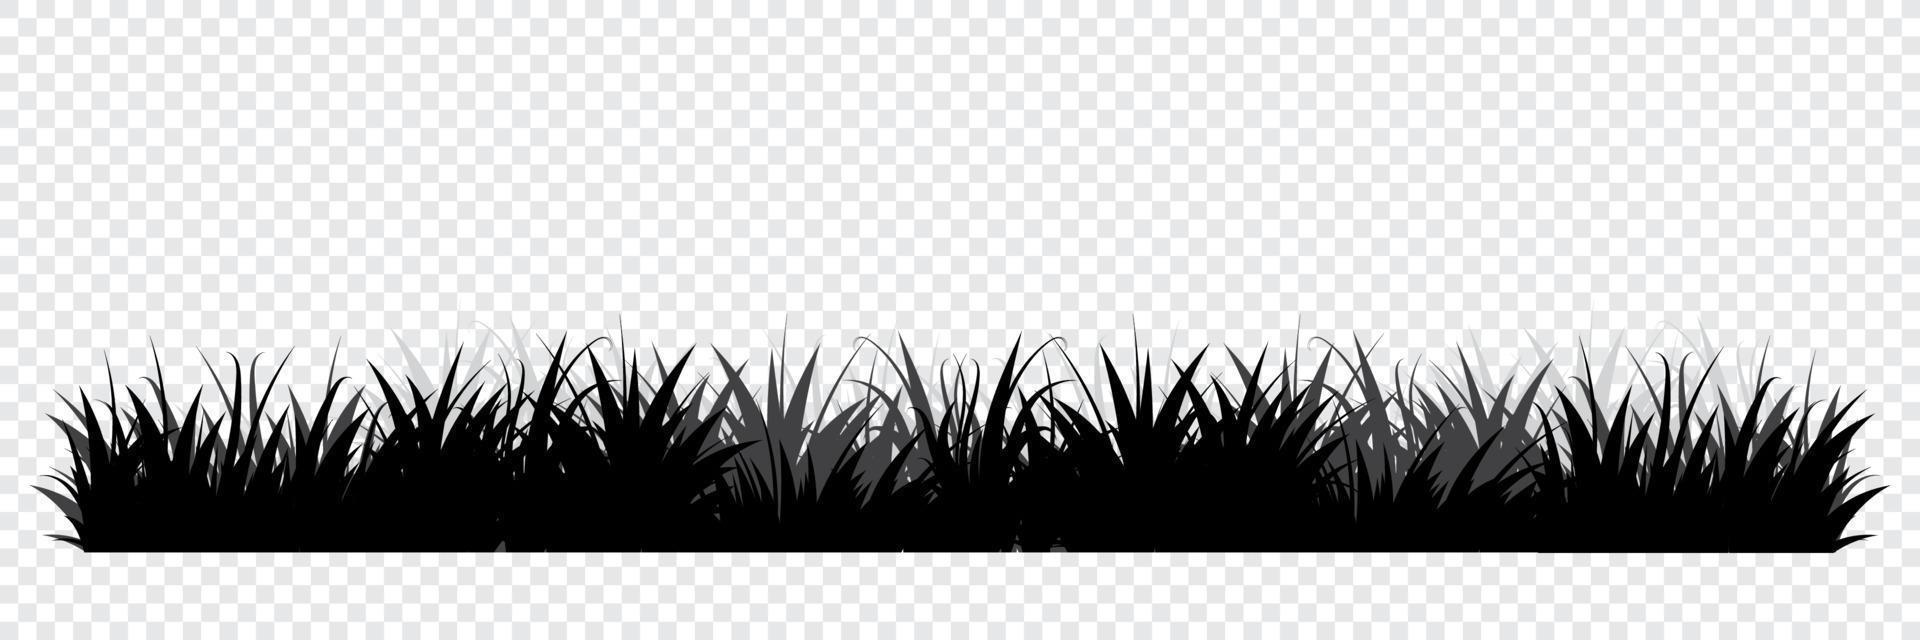 Black silhouettes of grass. Floral background. Wild grass. Grass borders silhouette. Vector illustration